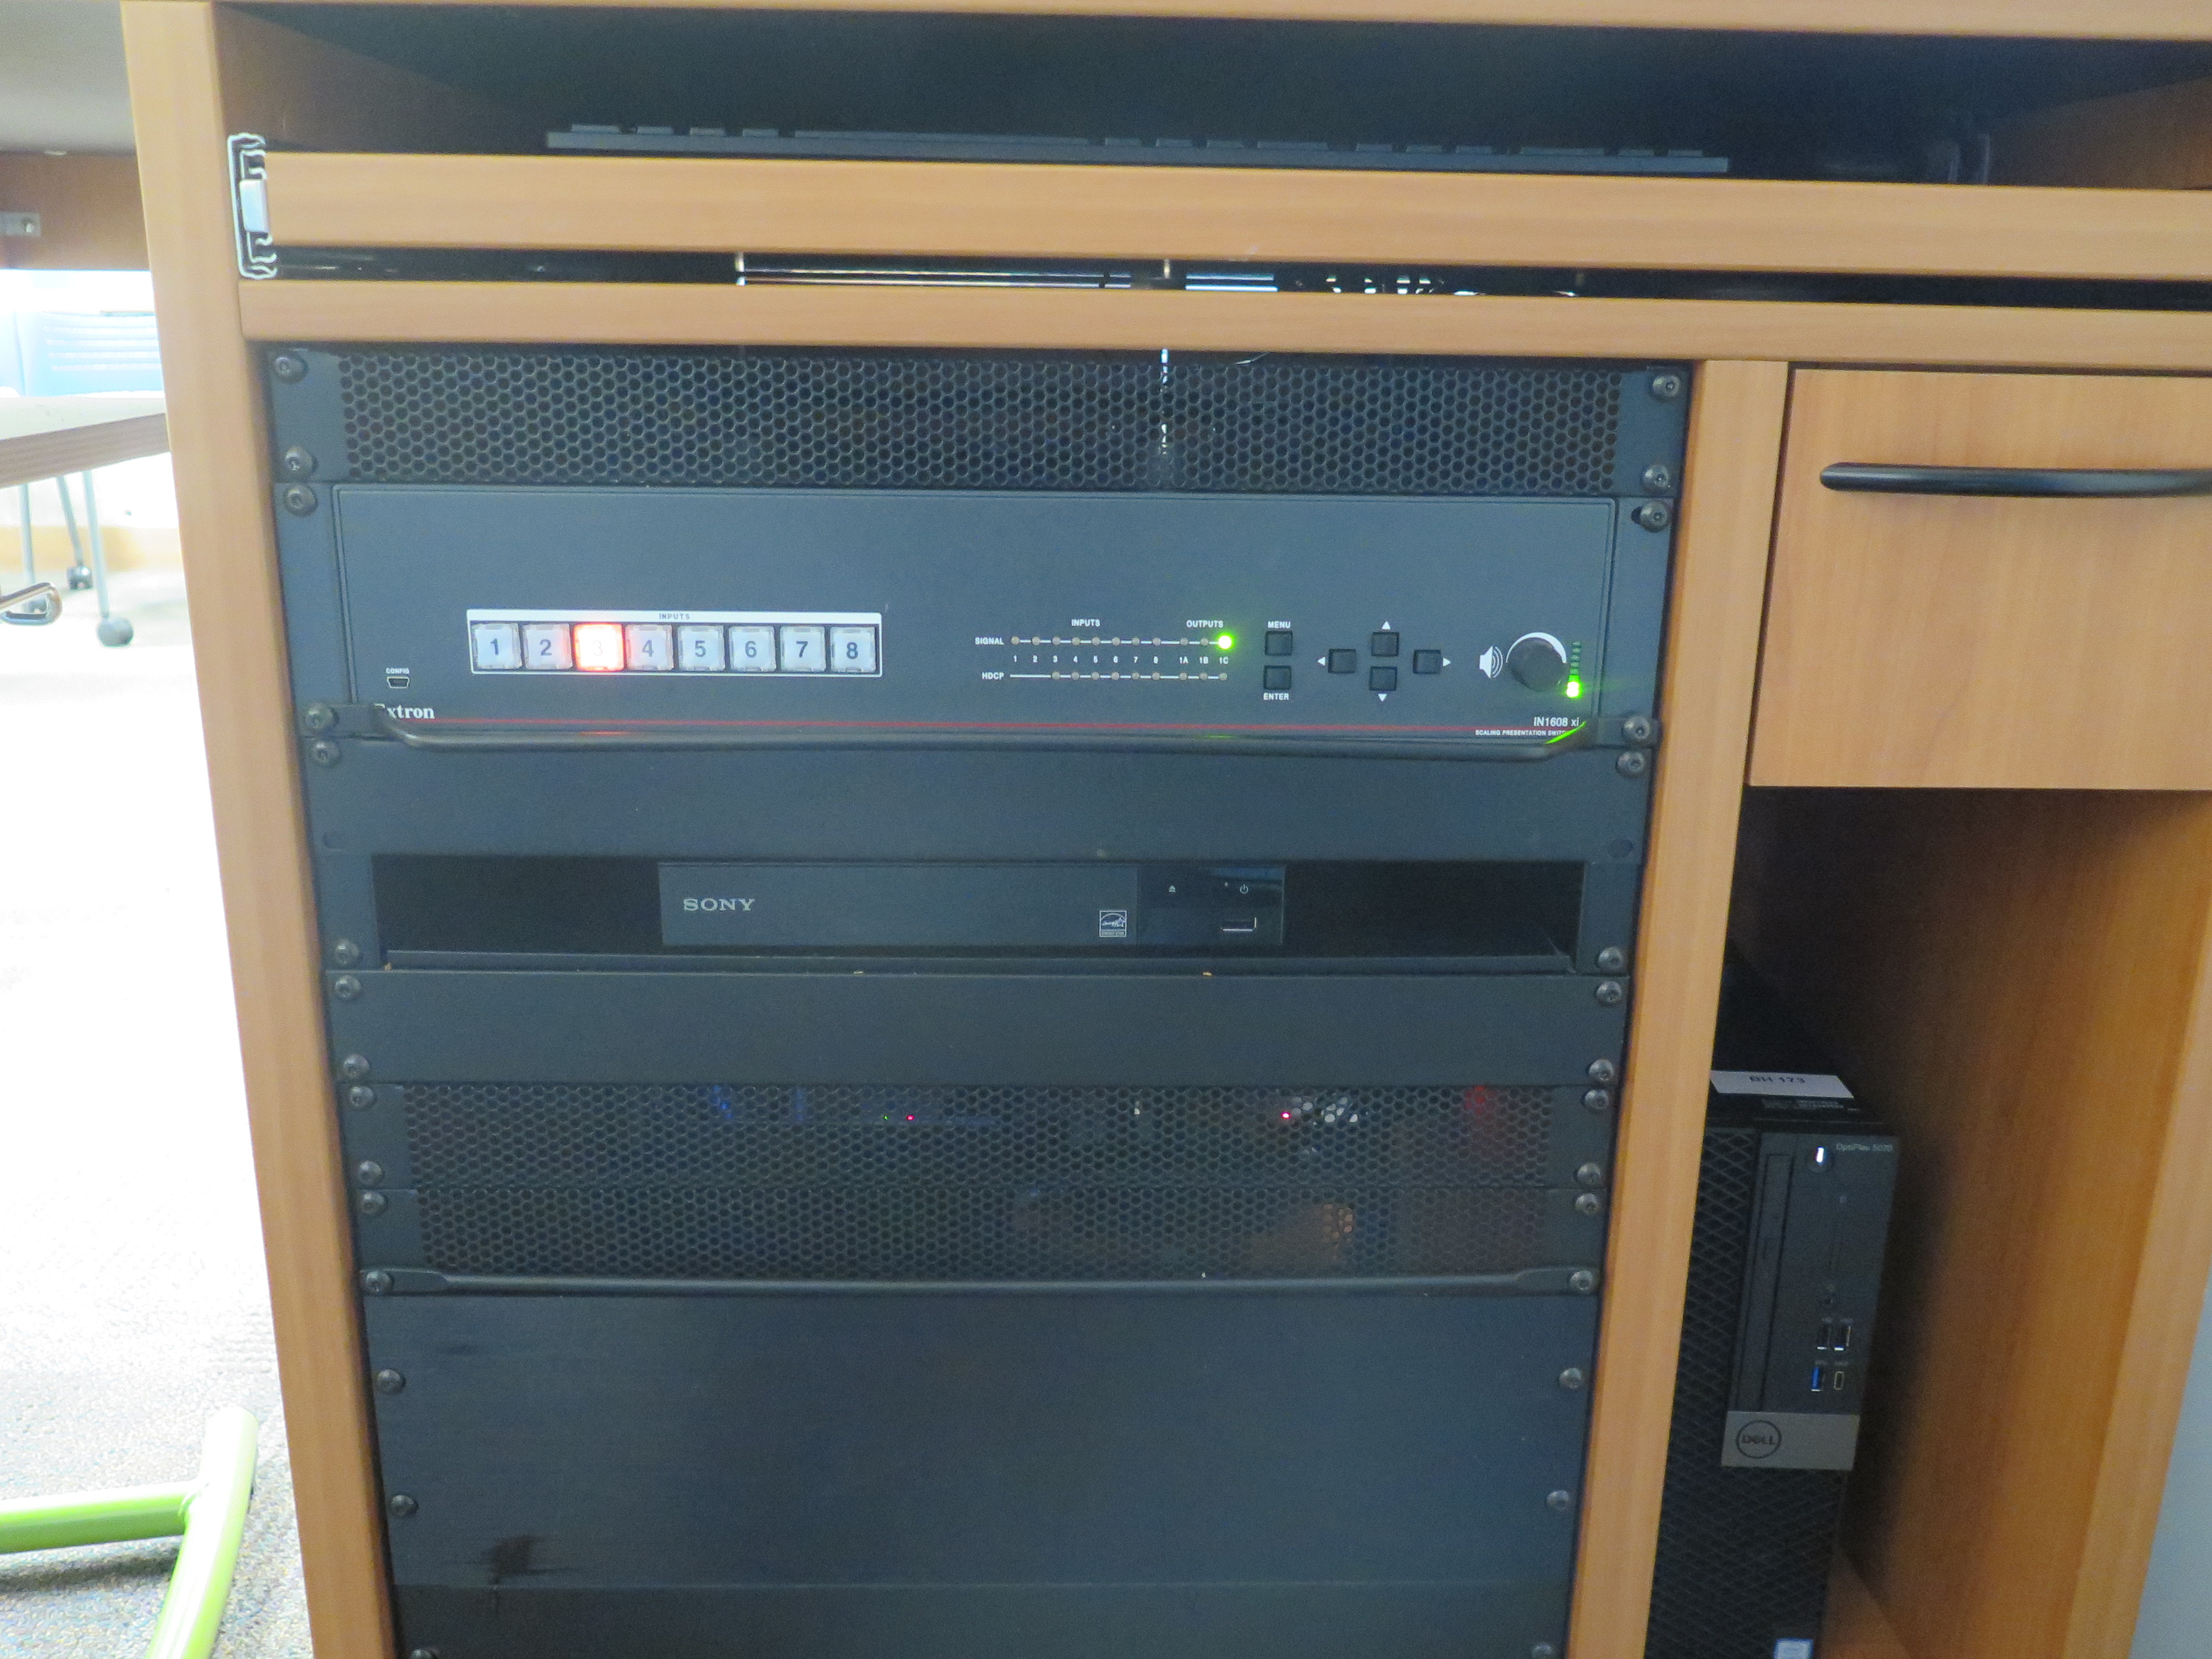 Front of Equipment rack showing AV Switcher. Below that is the DVD Player. To the right is the compartment with the Dell Computer CPU.